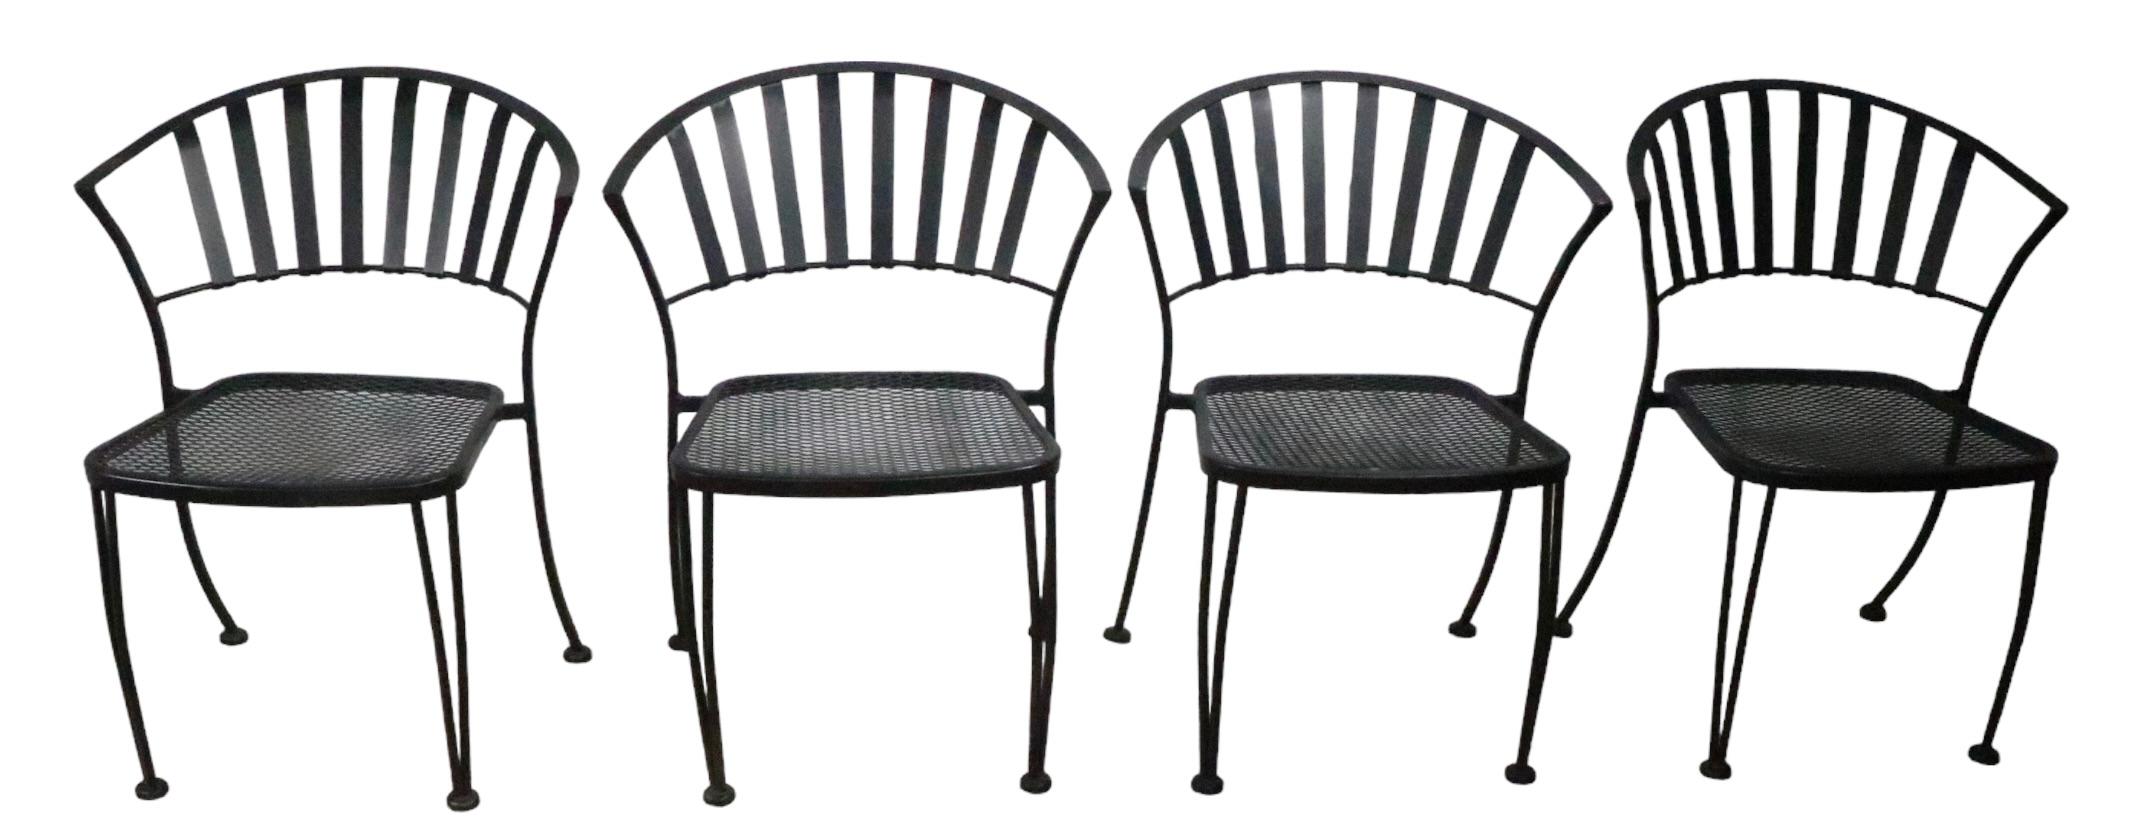 Set of Four Vintage Garden Patio Poolside Metal Strap Dining Chairs For Sale 3